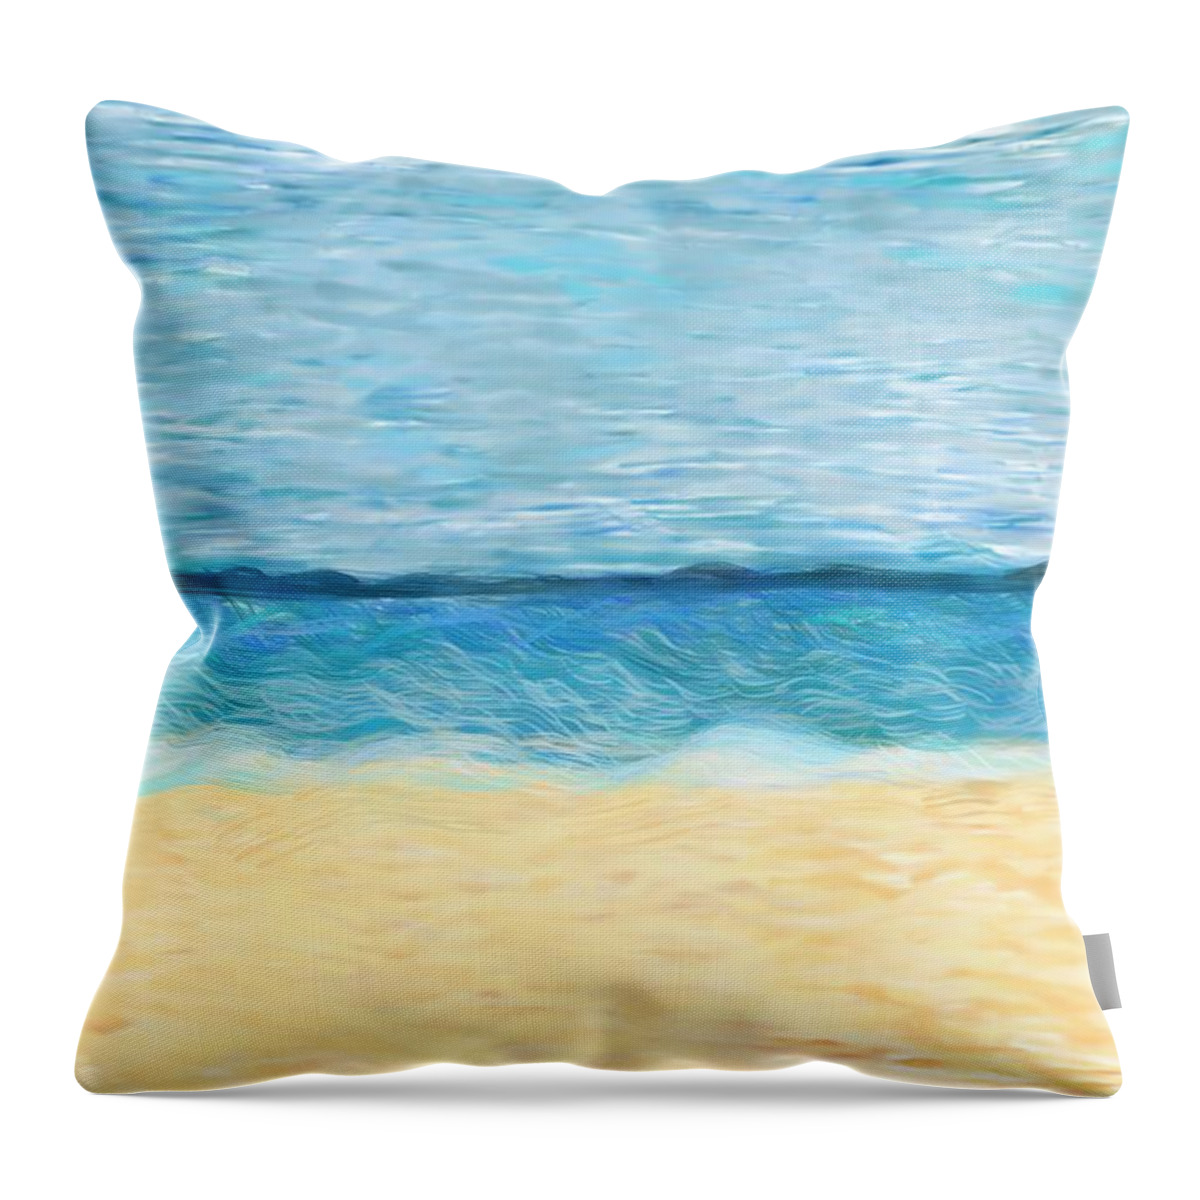 Beach Throw Pillow featuring the digital art My Happy Place by Christina Wedberg